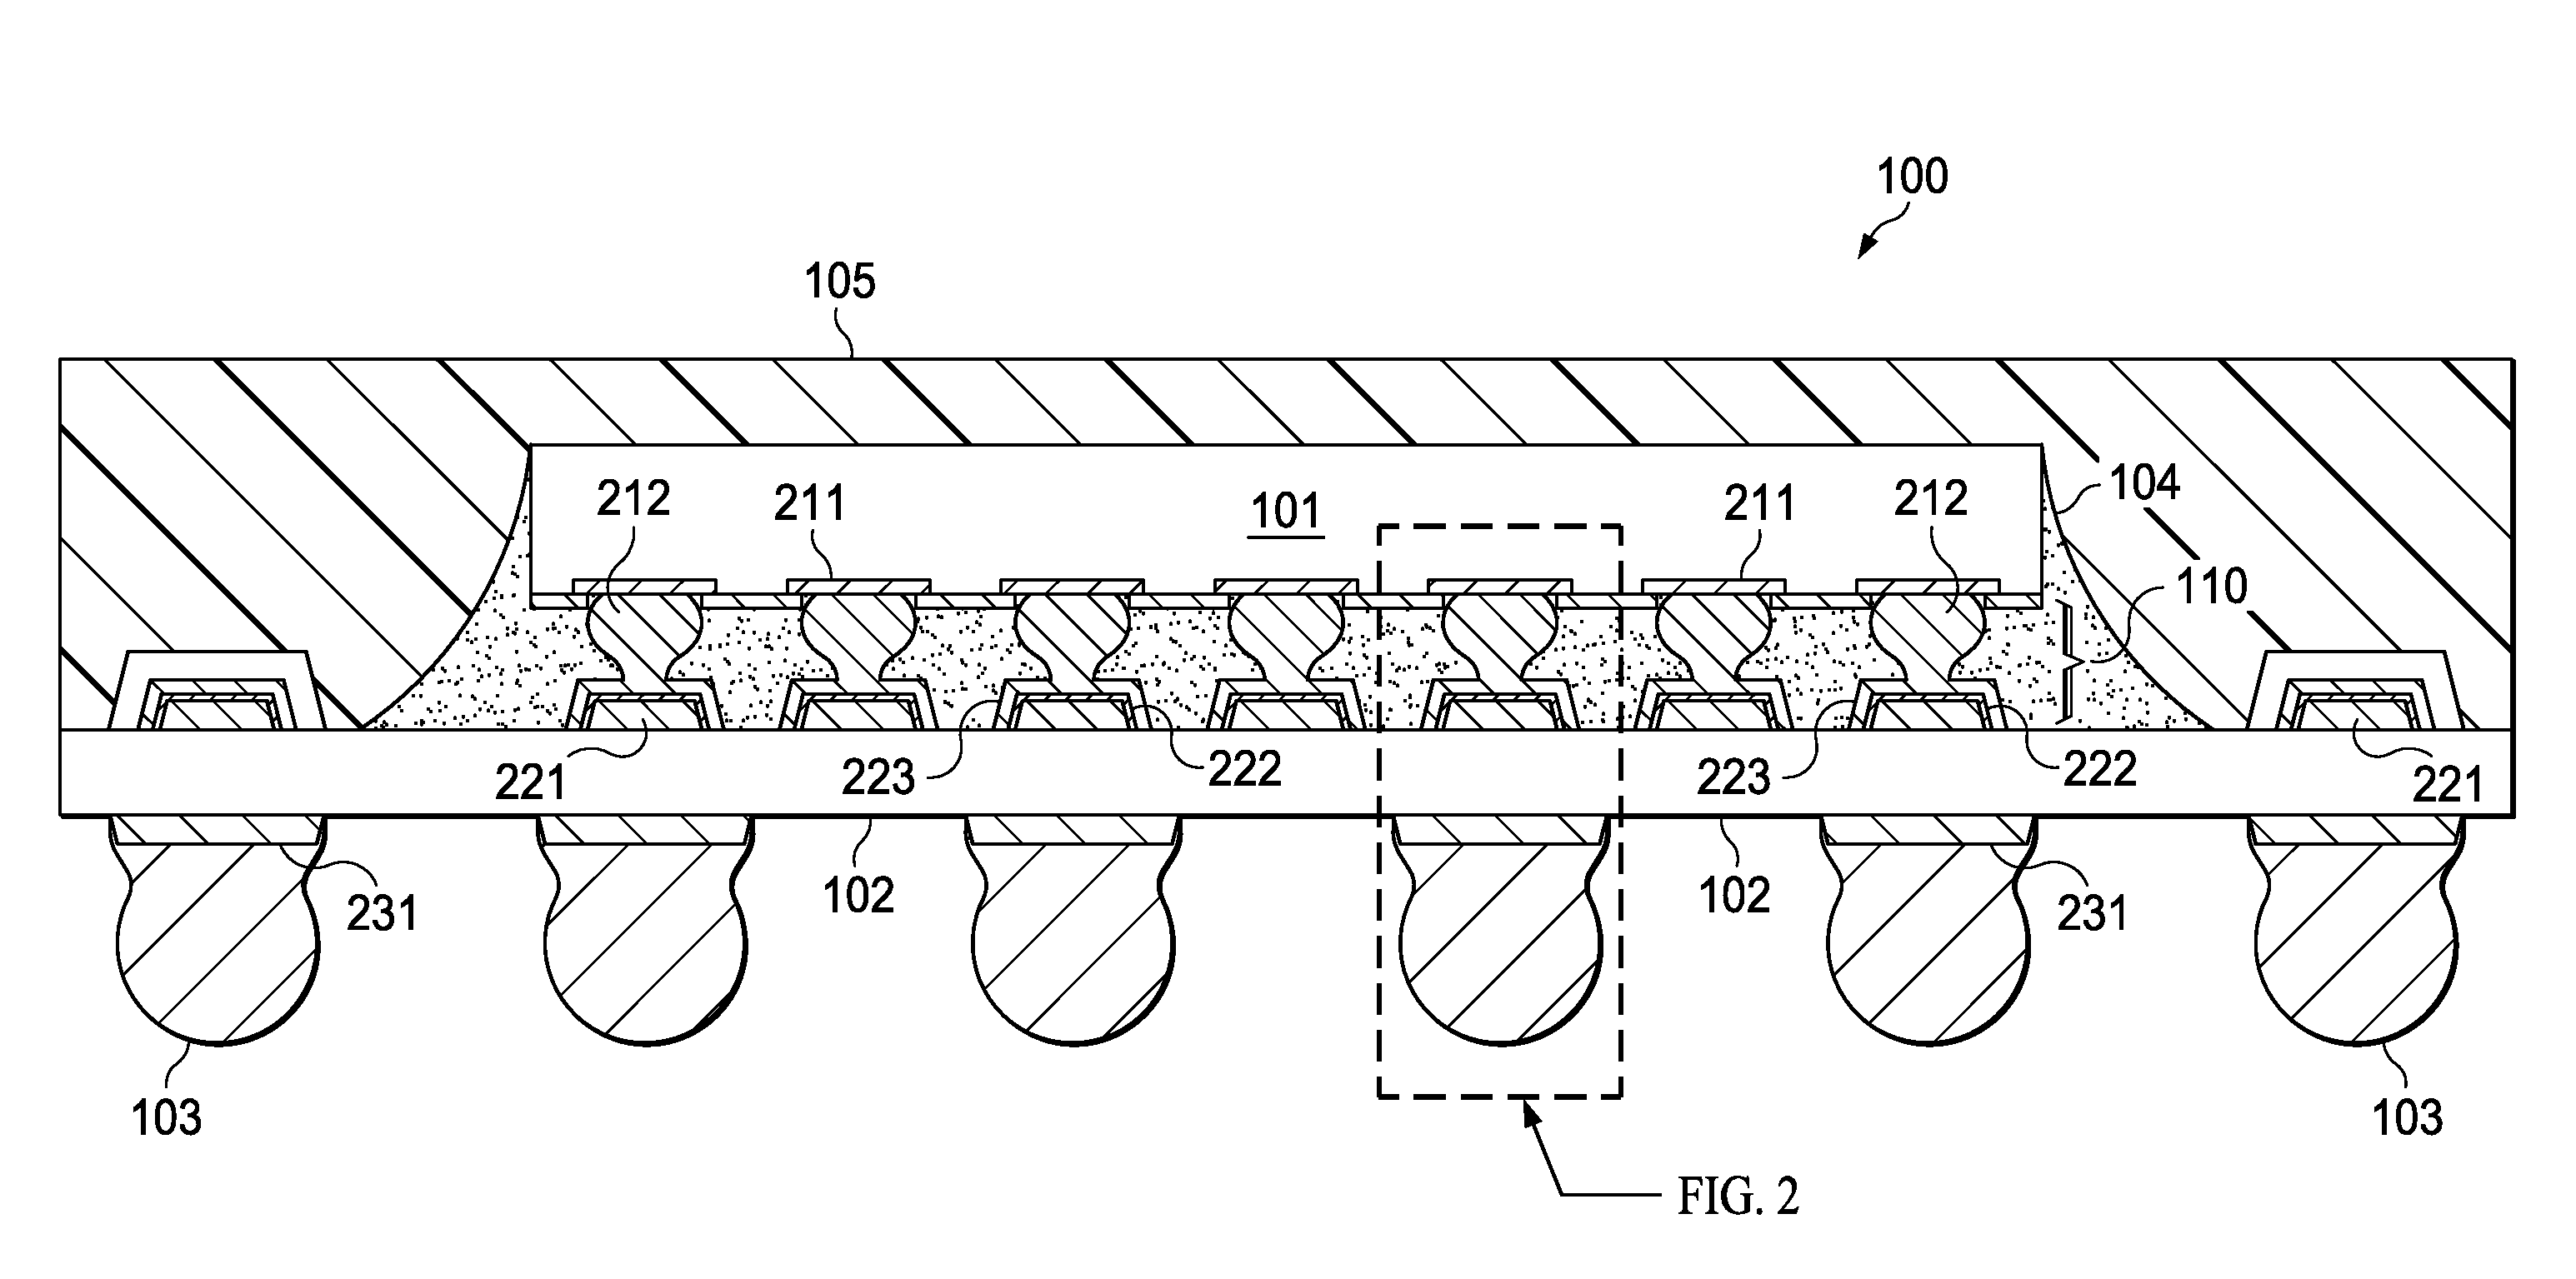 Semiconductor device having solder-free gold bump contacts for stability in repeated temperature cycles